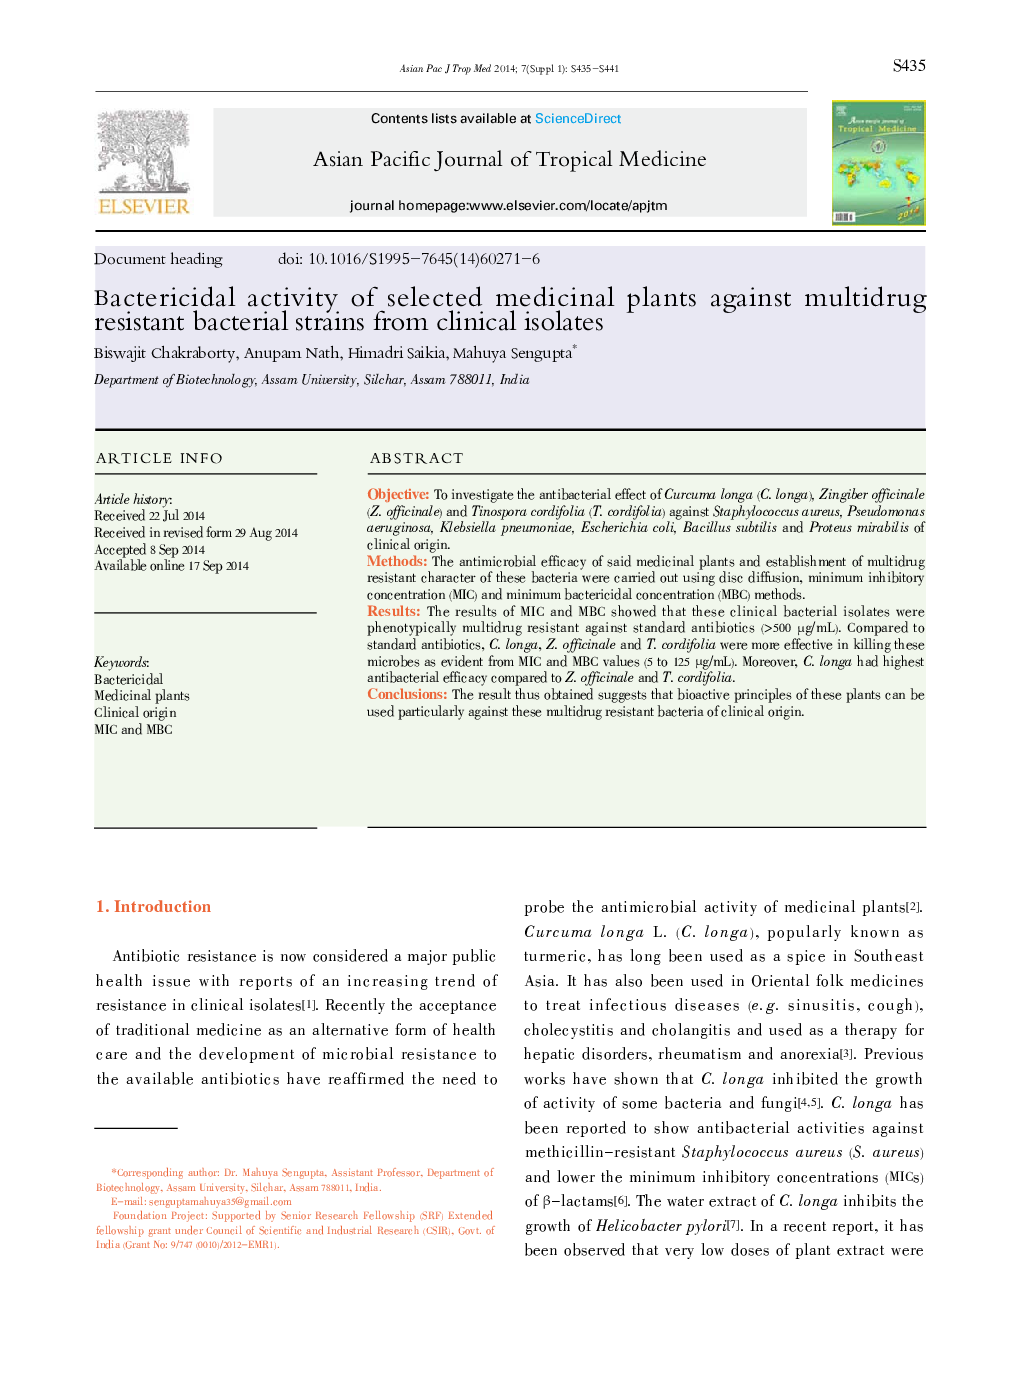 Bactericidal activity of selected medicinal plants against multidrug resistant bacterial strains from clinical isolates 